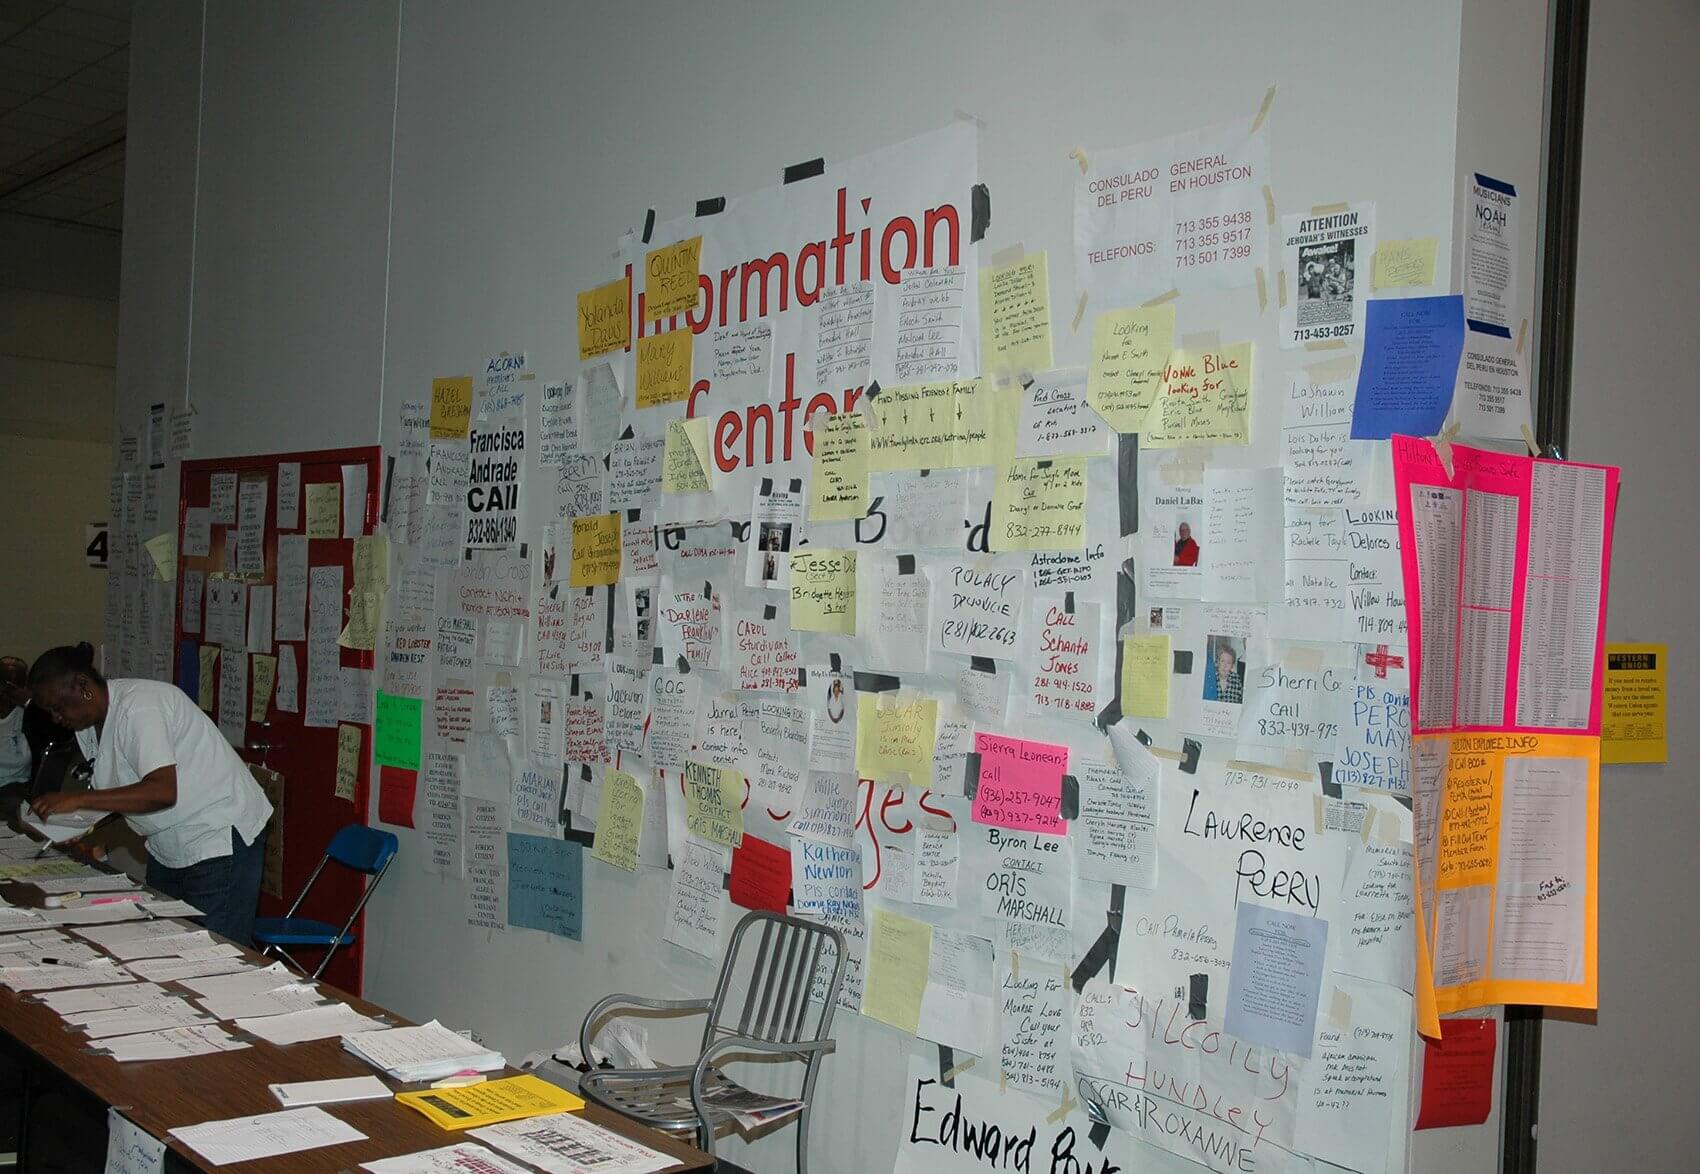 The information center at the George R. Brown. (Photo courtesy The University of Texas Health Science Center at Houston)